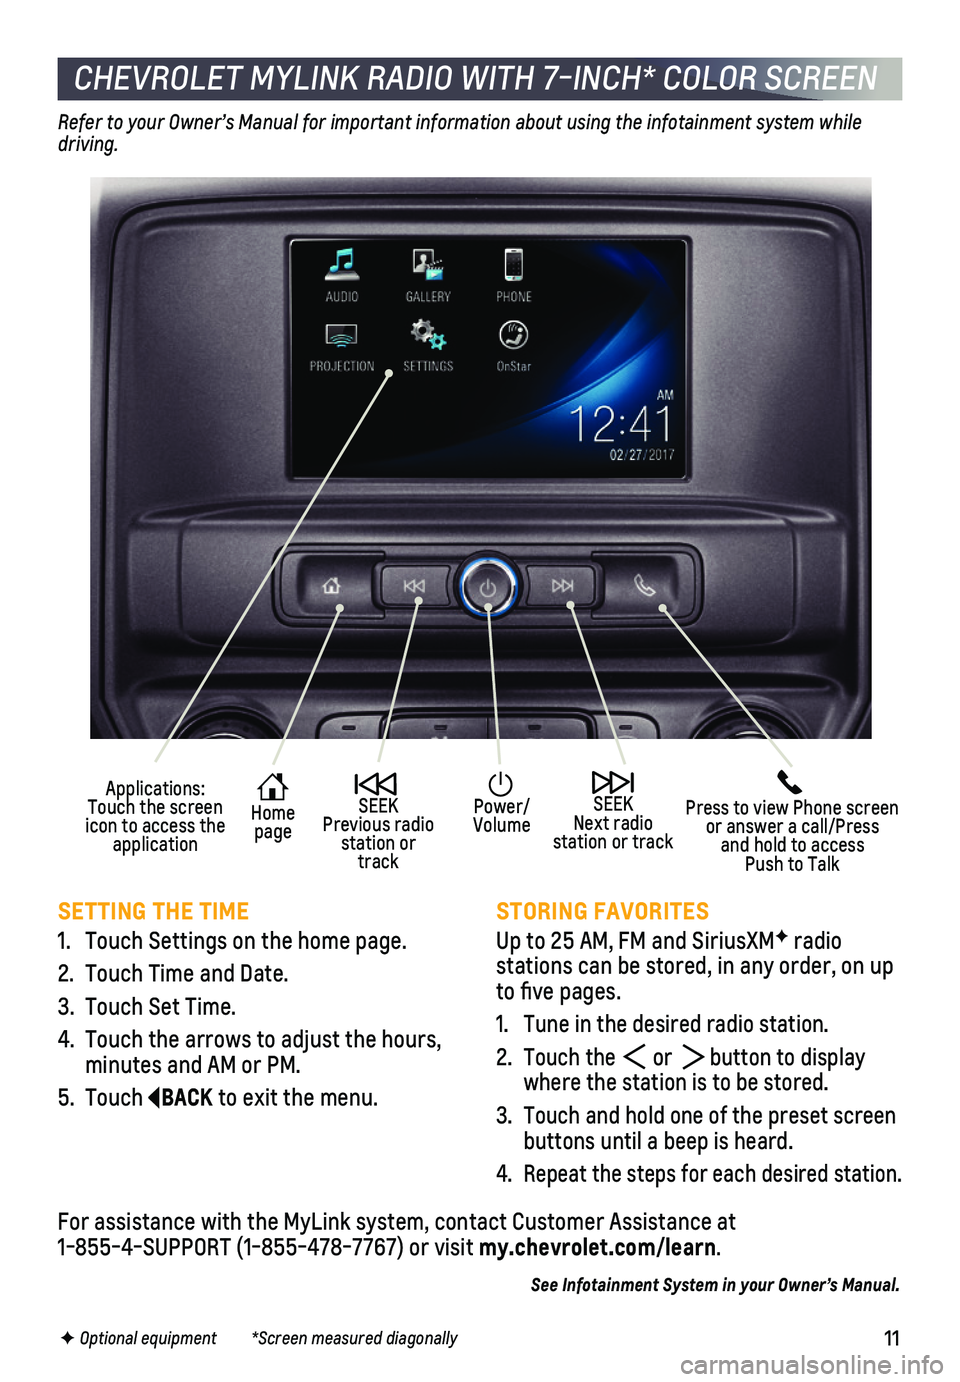 CHEVROLET SILVERADO 2018  Get To Know Guide 11
CHEVROLET MYLINK RADIO WITH 7-INCH* COLOR SCREEN
SETTING THE TIME
1. Touch Settings on the home page. 
2. Touch Time and Date. 
3. Touch Set Time. 
4. Touch the arrows to adjust the hours, minutes 